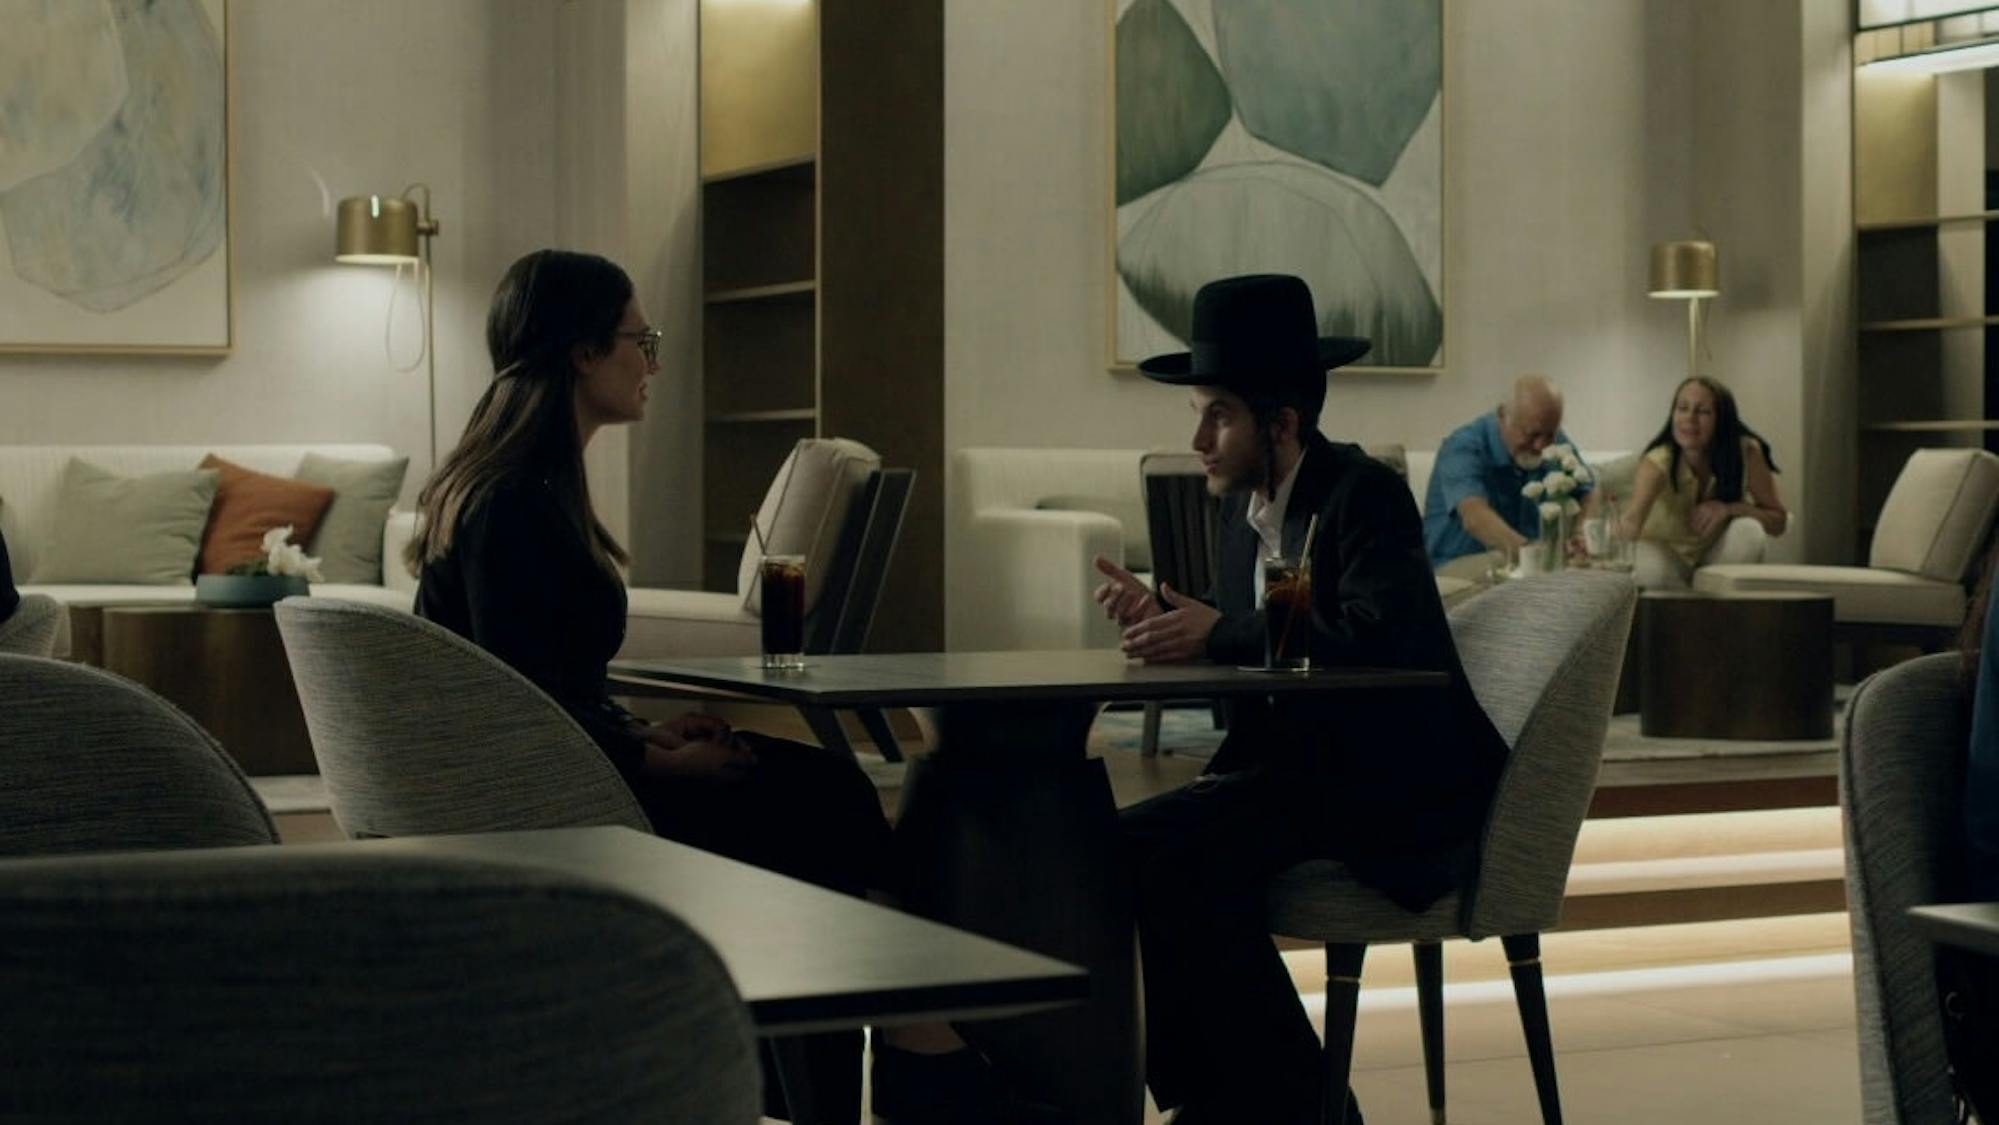 This shot is full of shadowy figures sitting at tables or couches. In the middle are a man and woman at a table talking over two sodas. The scene looks more modern than some of the other shots from Shtisel.